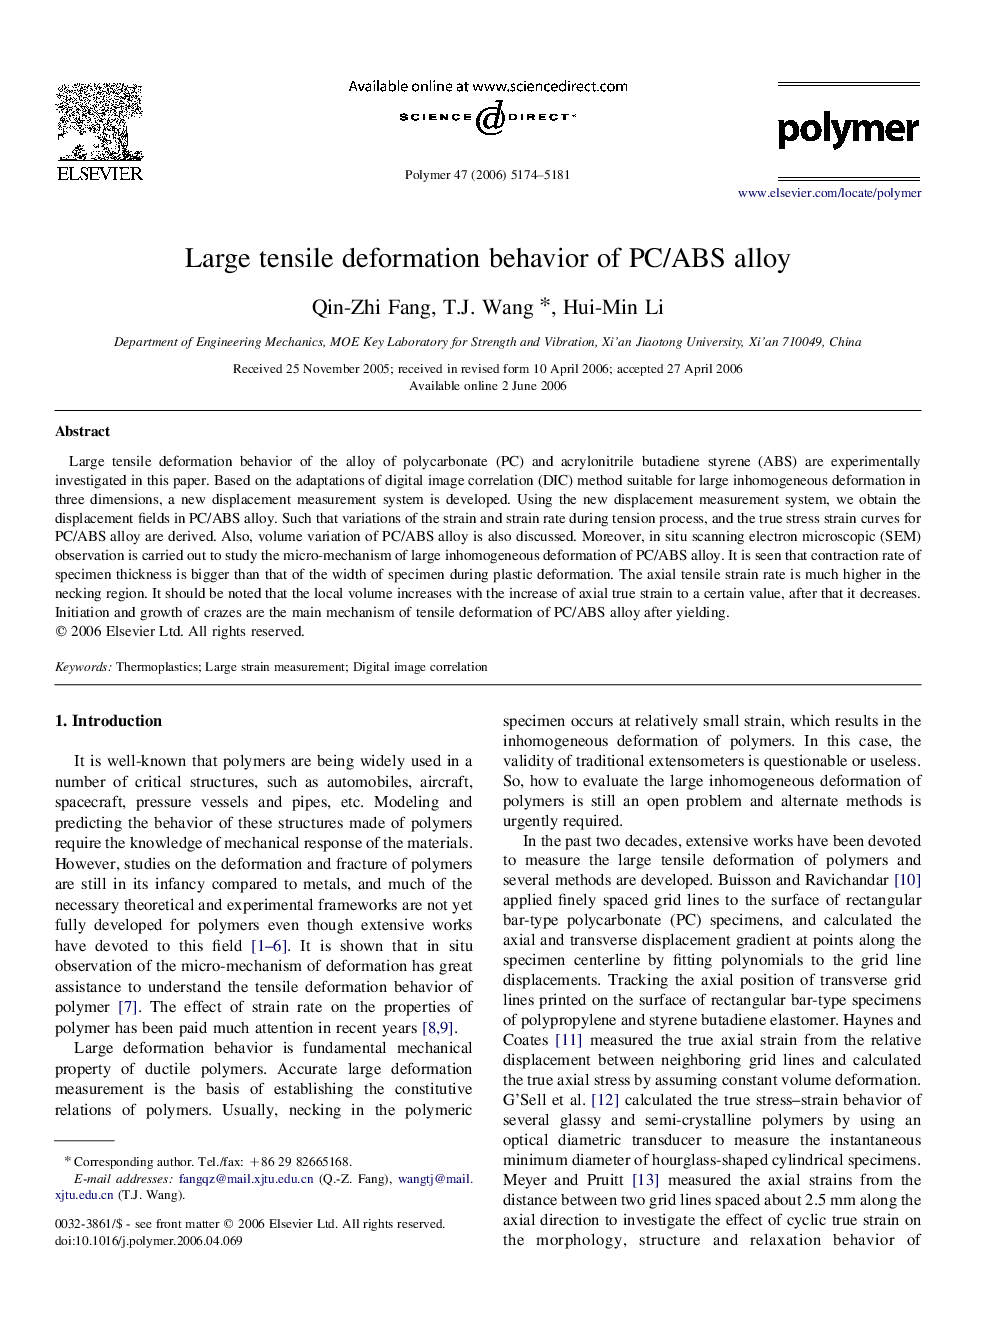 Large tensile deformation behavior of PC/ABS alloy